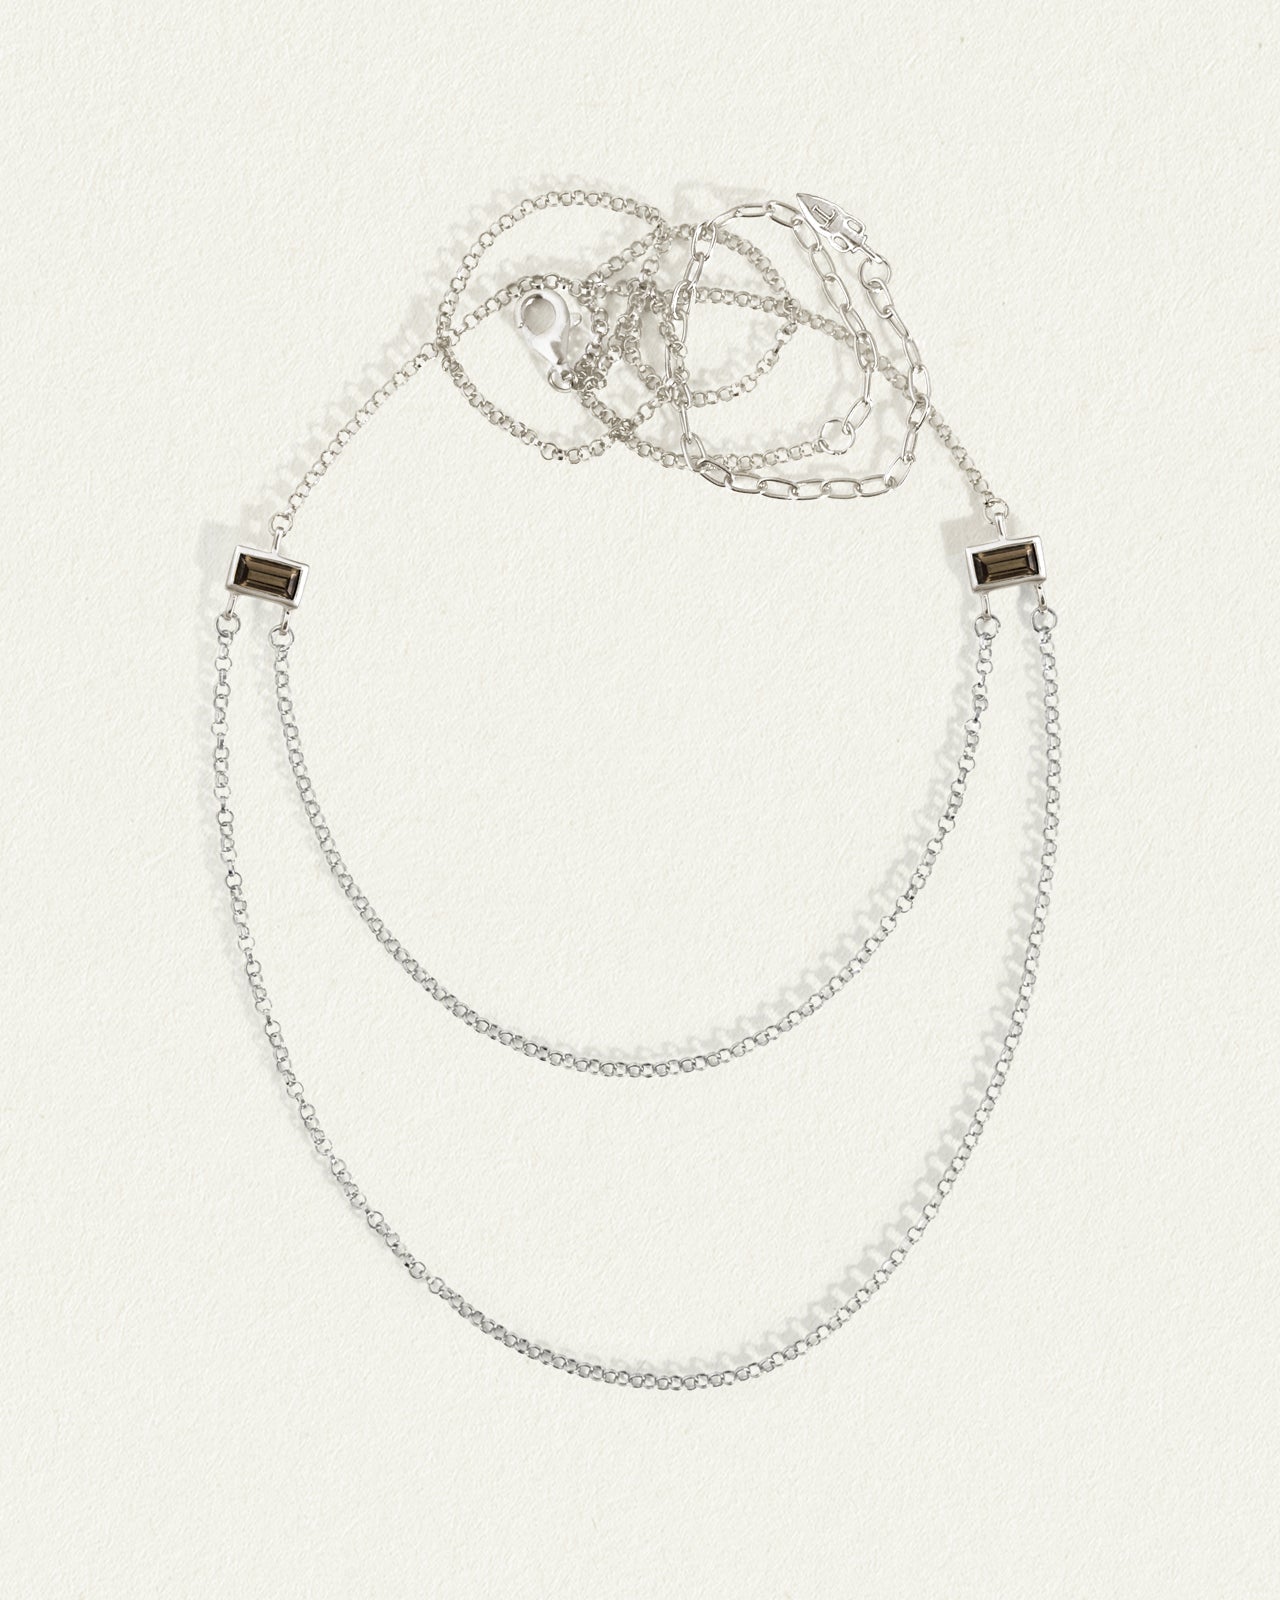 KOMEHYO|HERMES New Farandor Necklace|HERMES|Brand Jewelry|Chain|Others|【Official】KOMEHYO,  one of the largest reuse department stores in the Japan